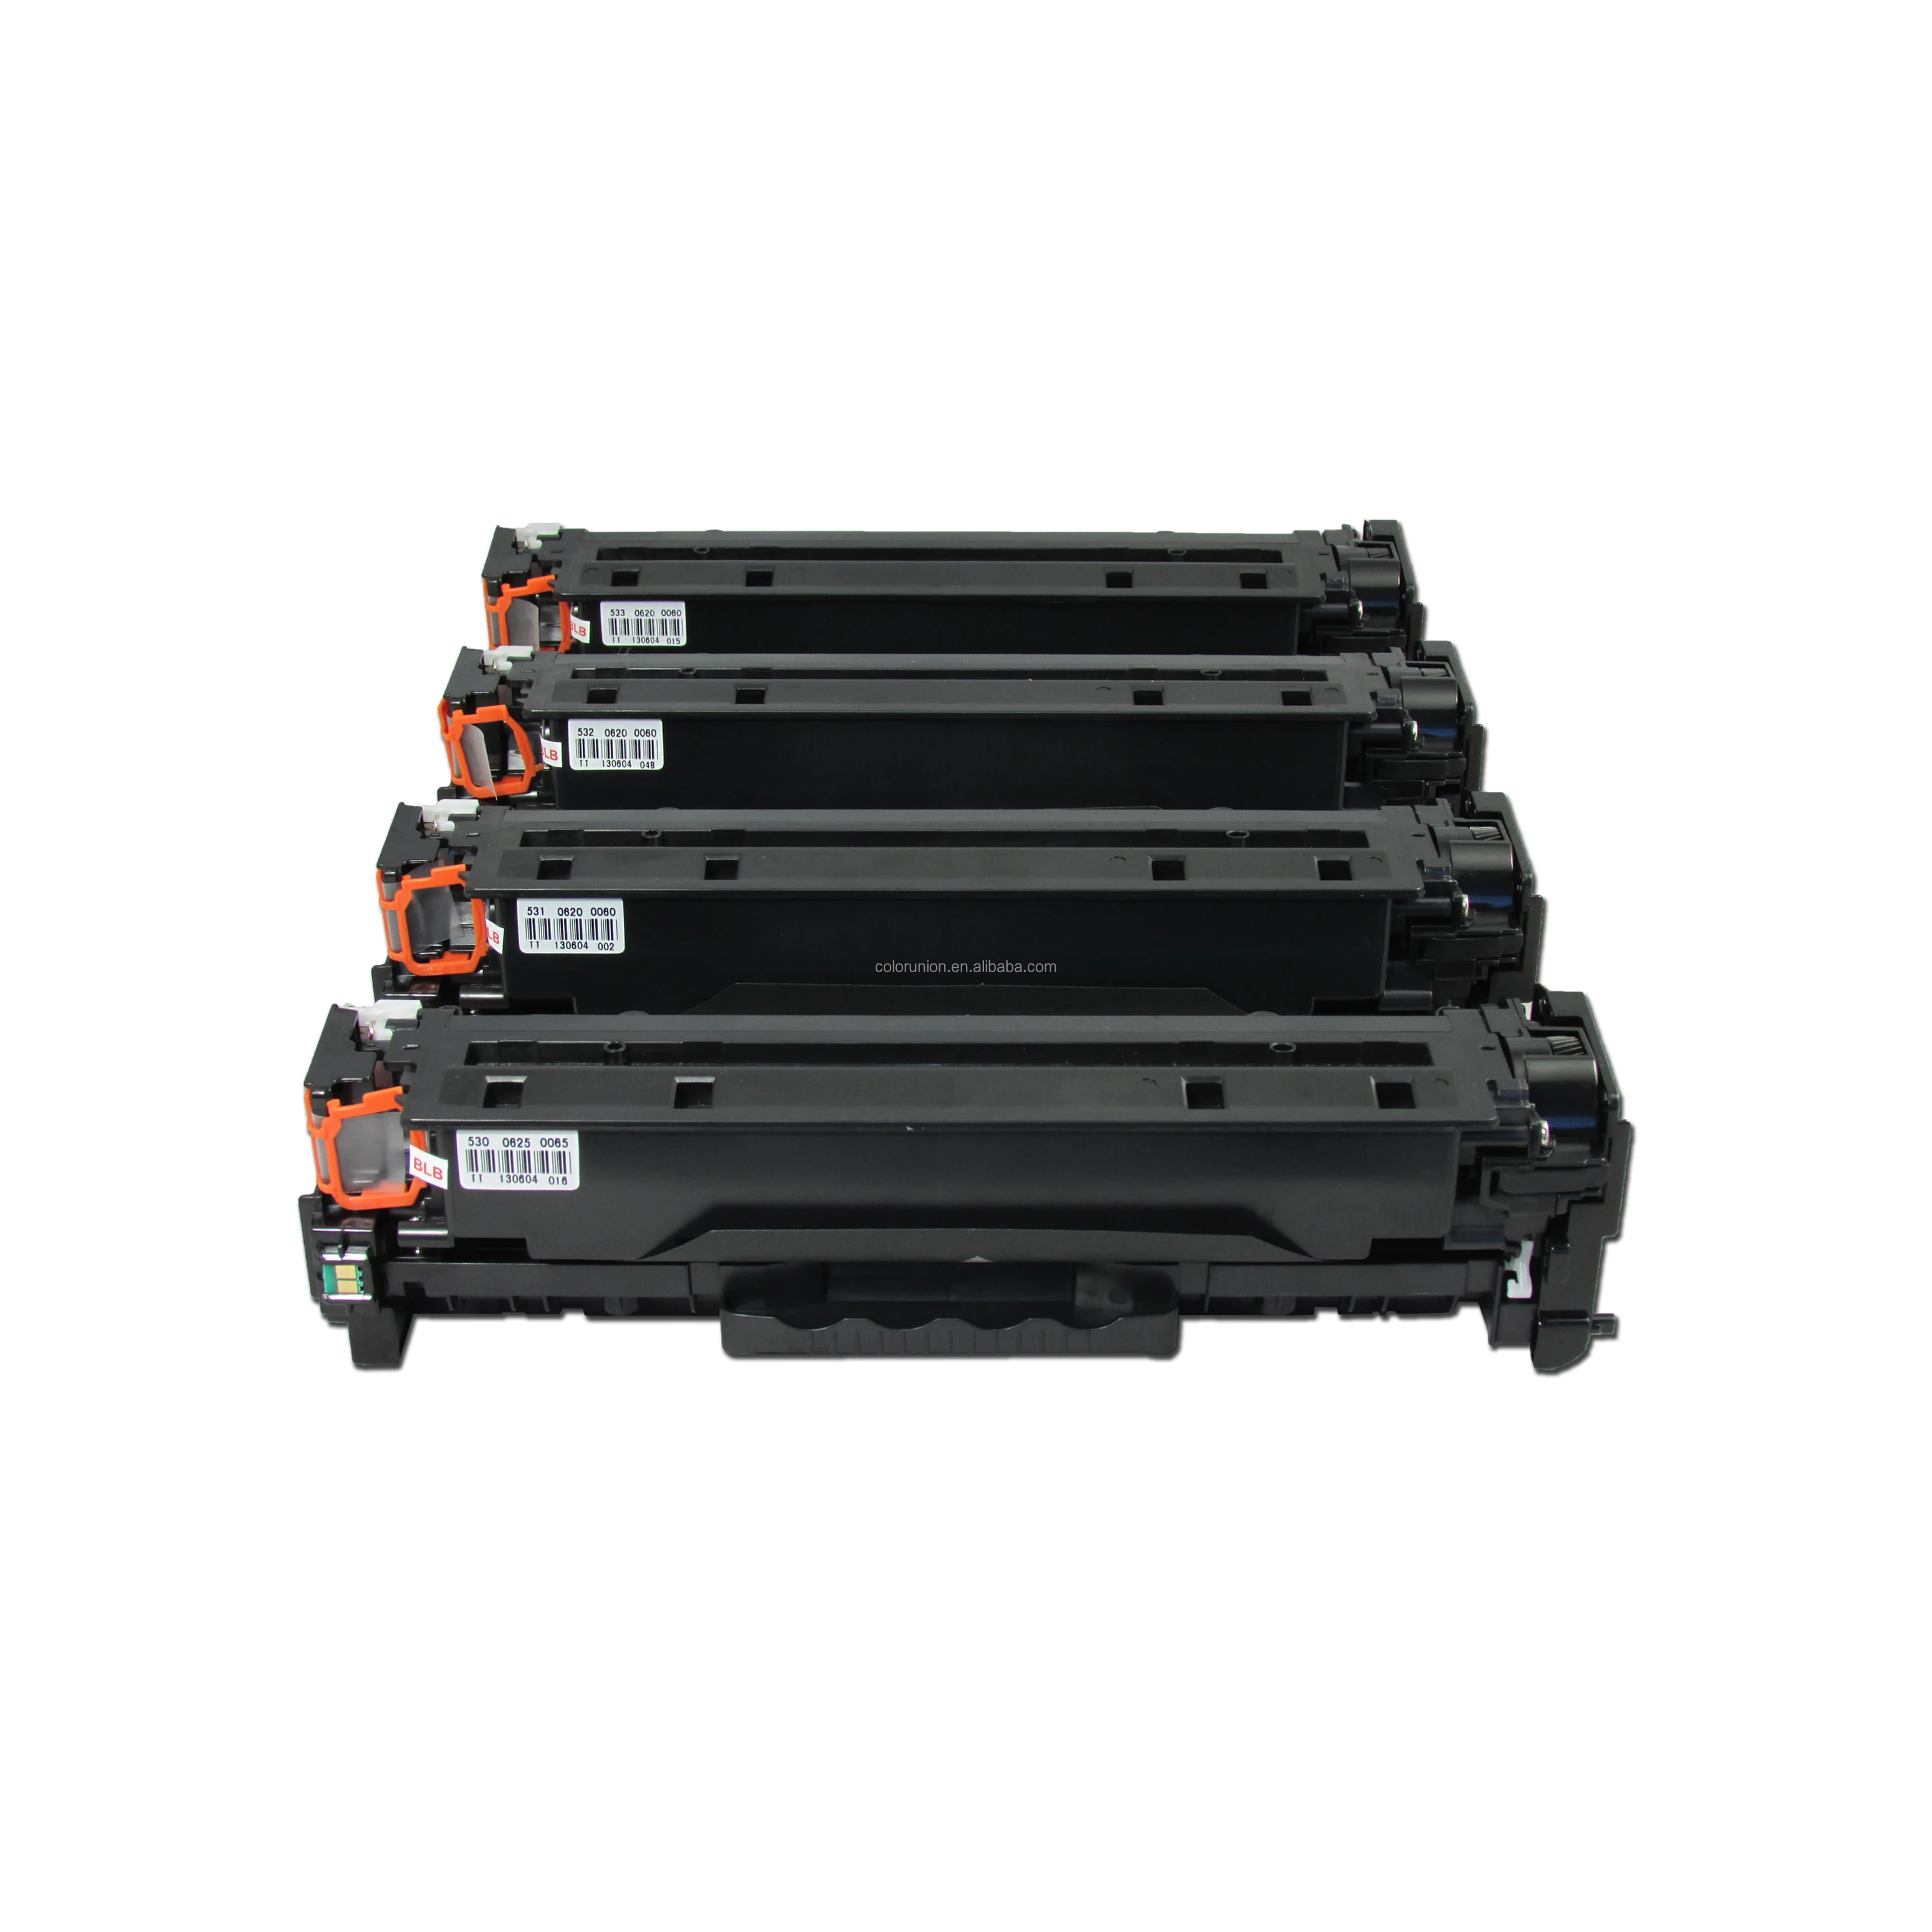 Top quality factory price  color laser toner cartridge usa 530A